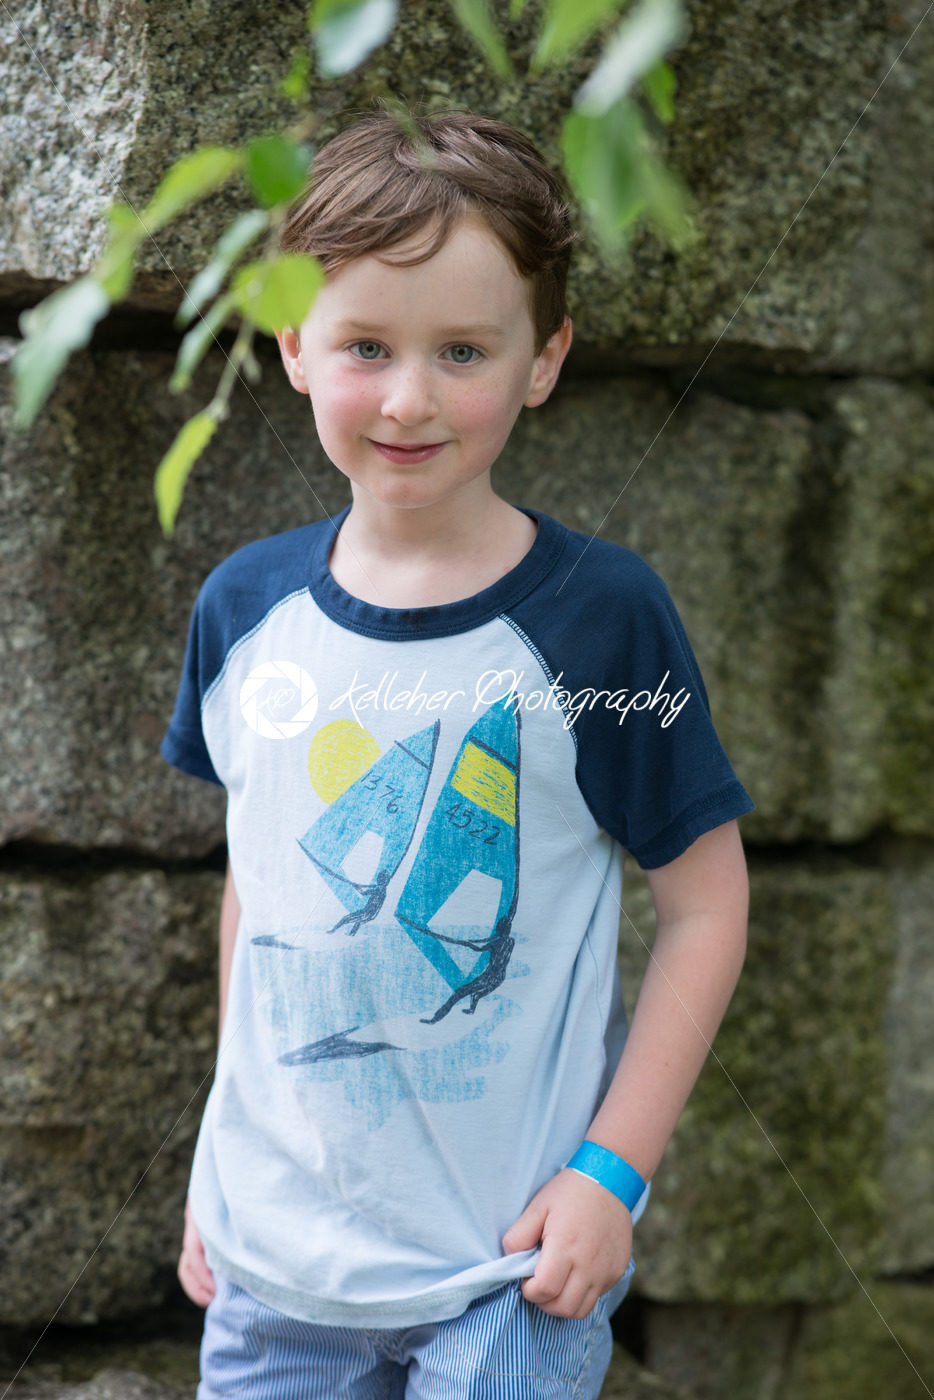 Smiling young boy standing outdoors - Kelleher Photography Store